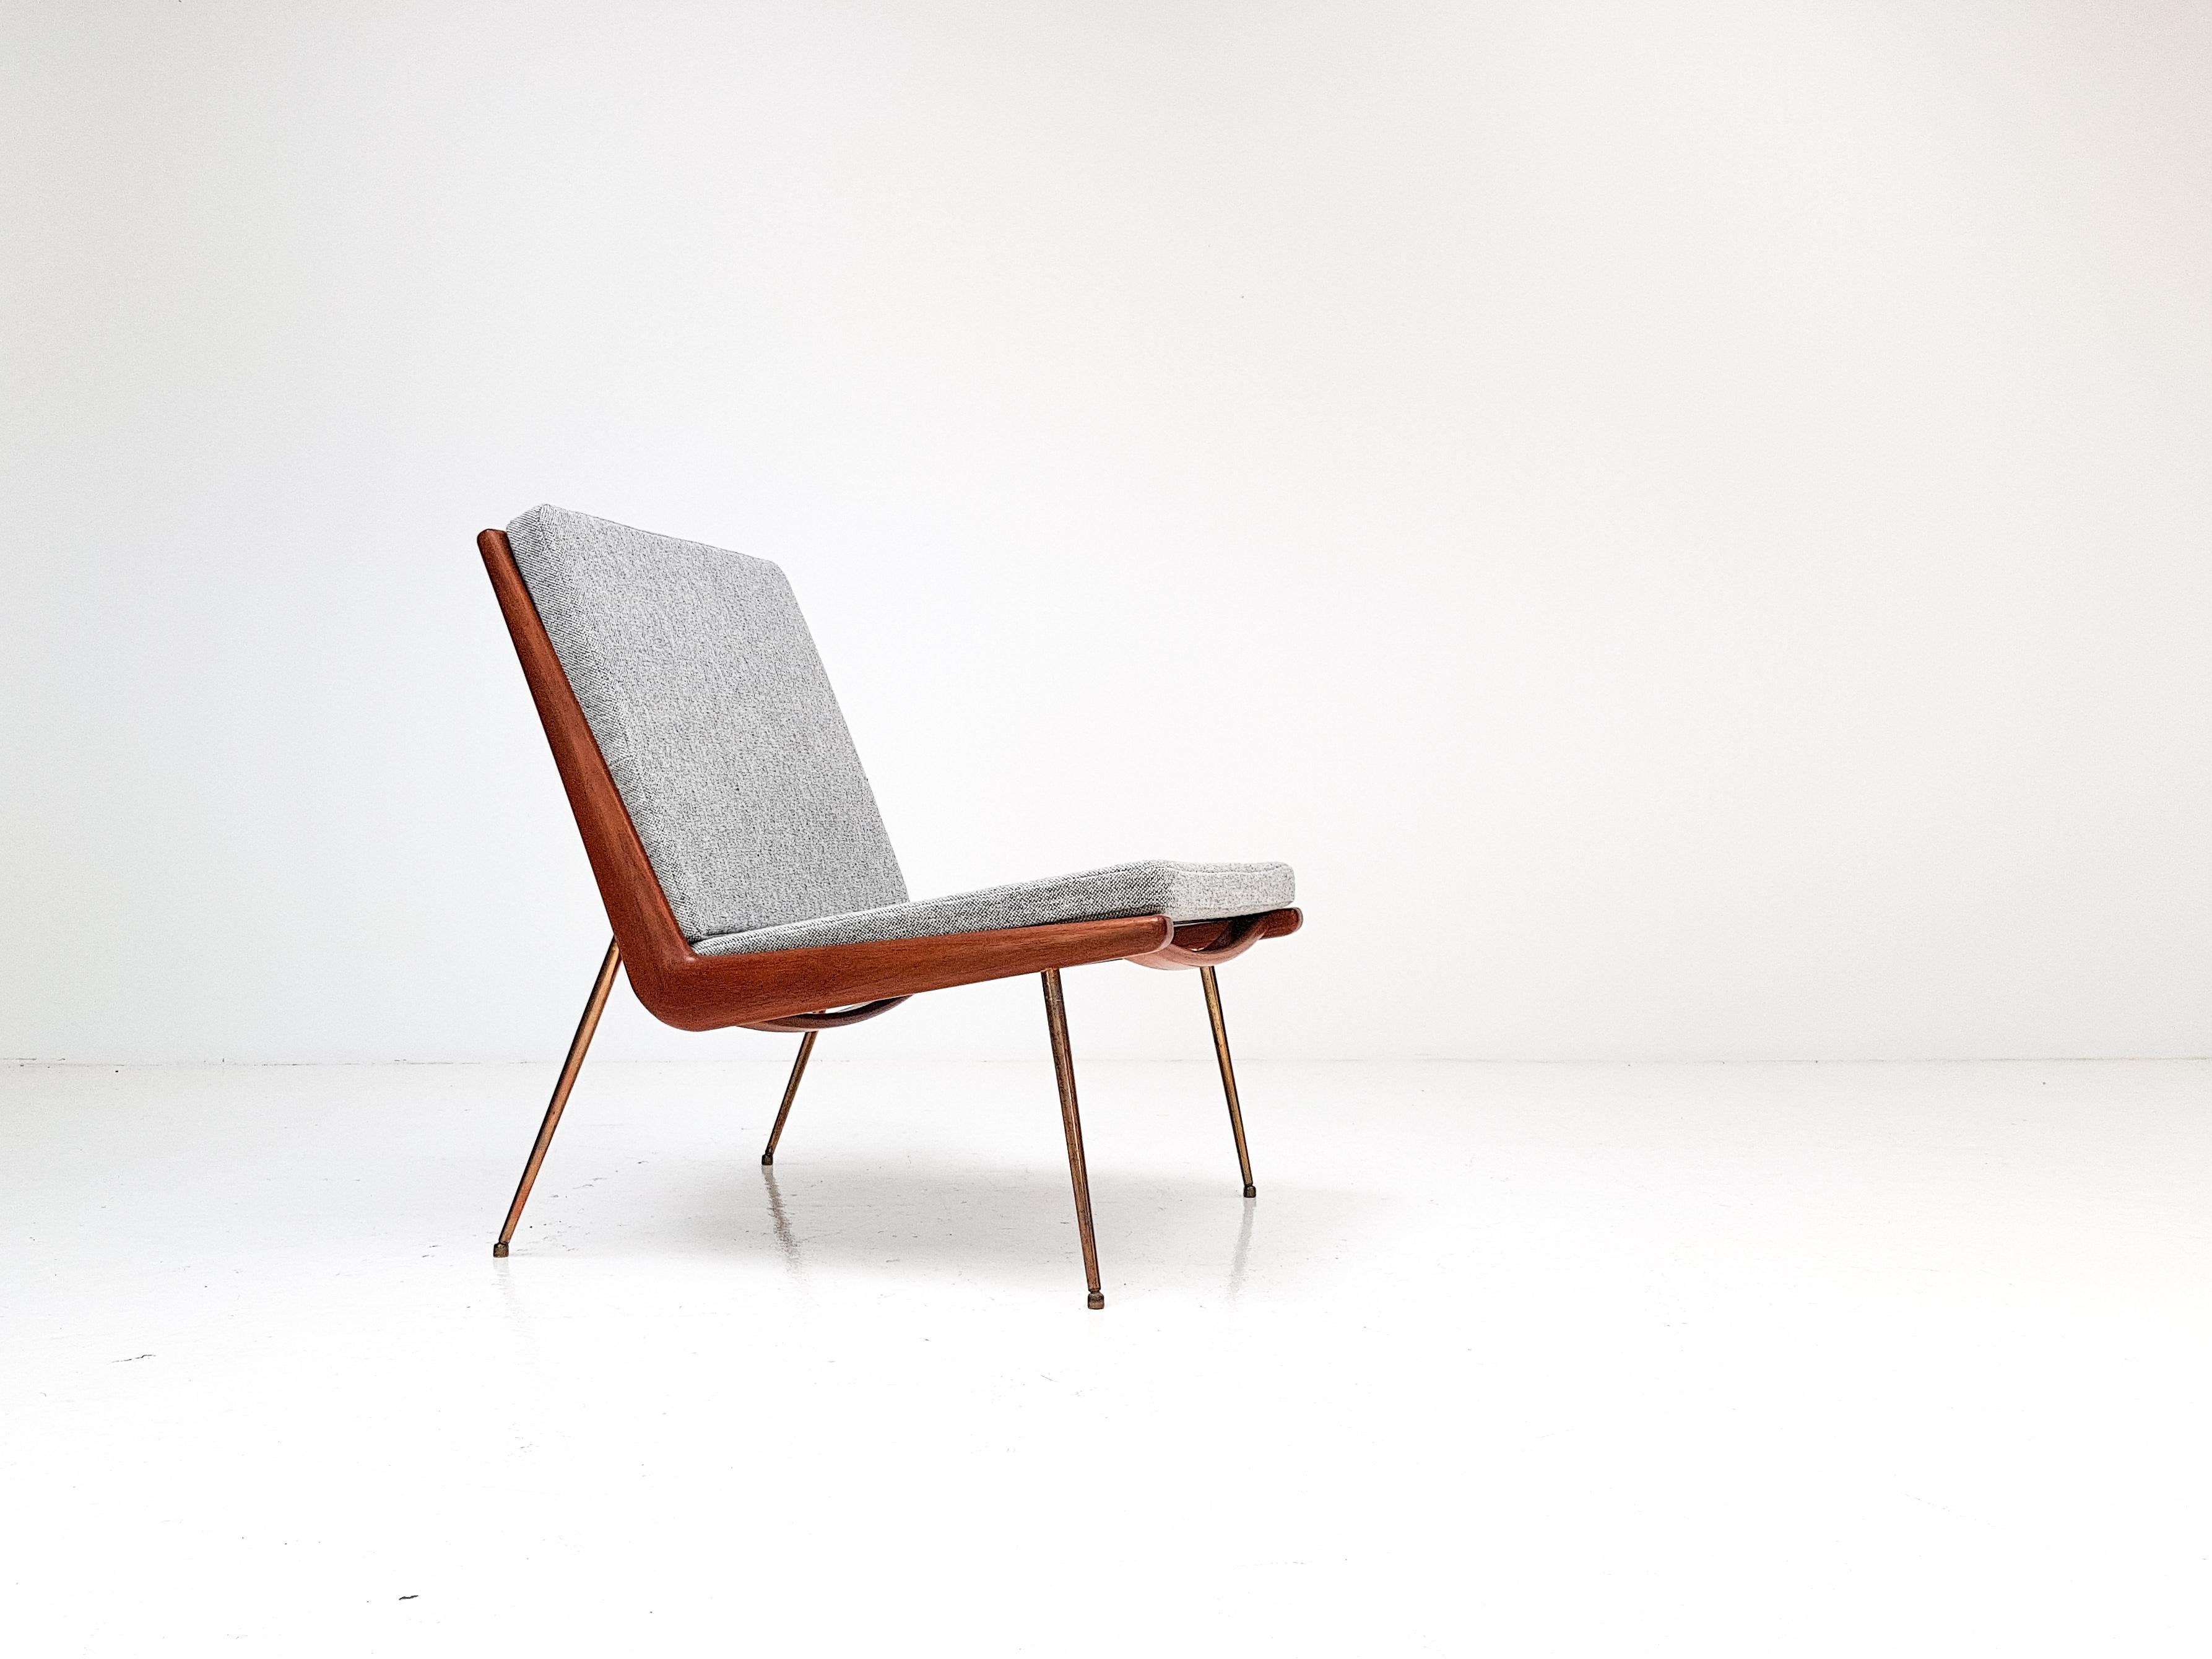 A Peter Hvidt & Orla Molgaard-Nielsen designed FD-134 'Boomerang' lounge chair for France & Son, Denmark, 1950s.

The chair has a boomerang-shaped frame in teak from which its name derives, brass legs, new cushions and new Kvadrat wool